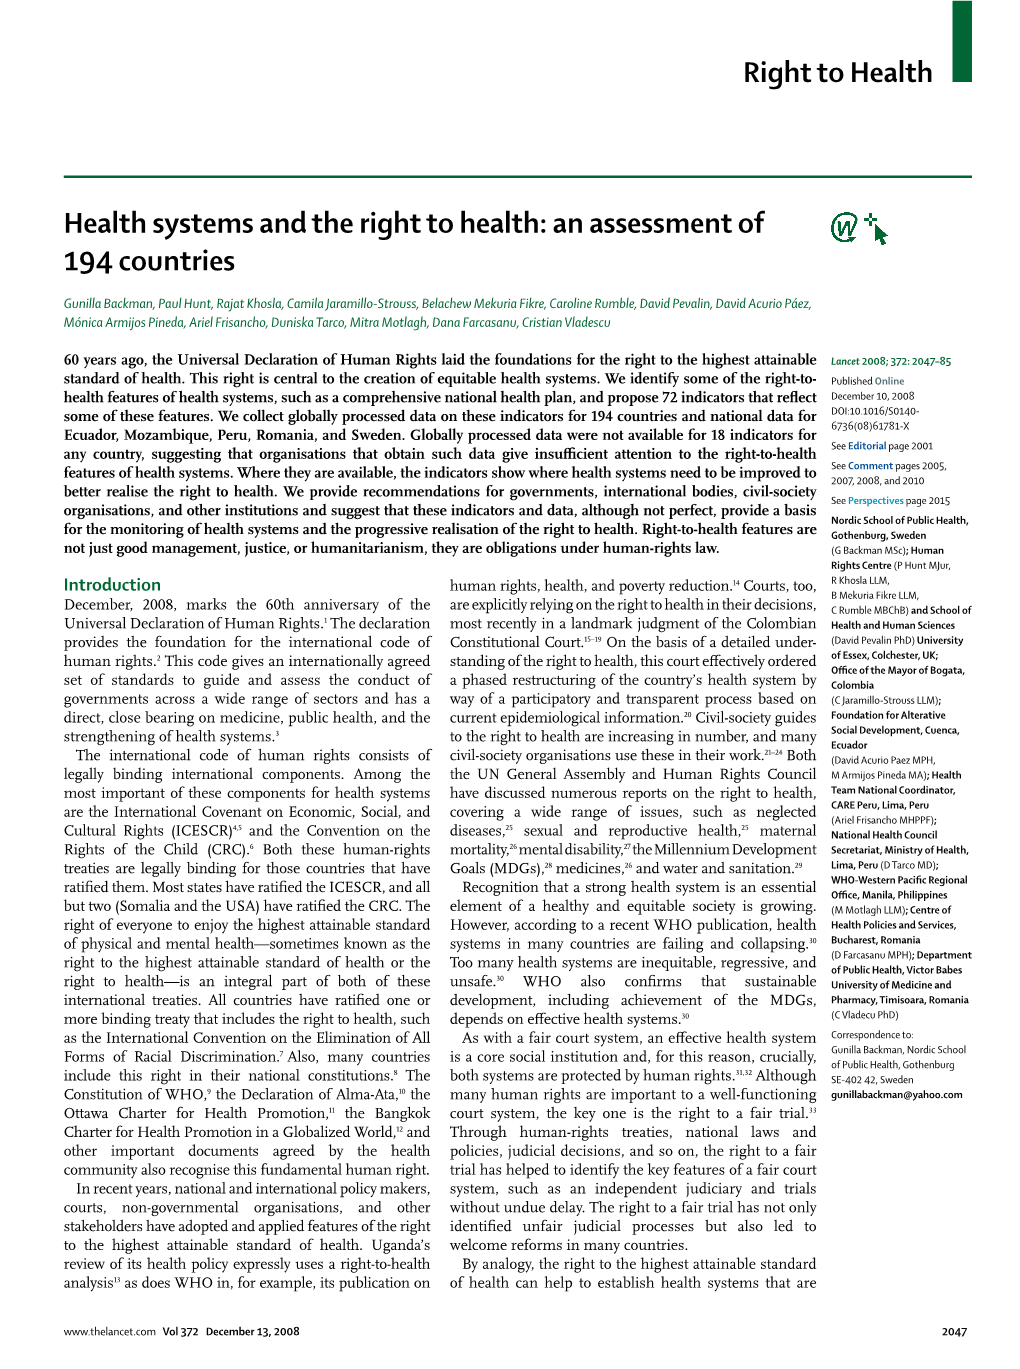 Health Systems and the Right to Health: an Assessment of 194 Countries